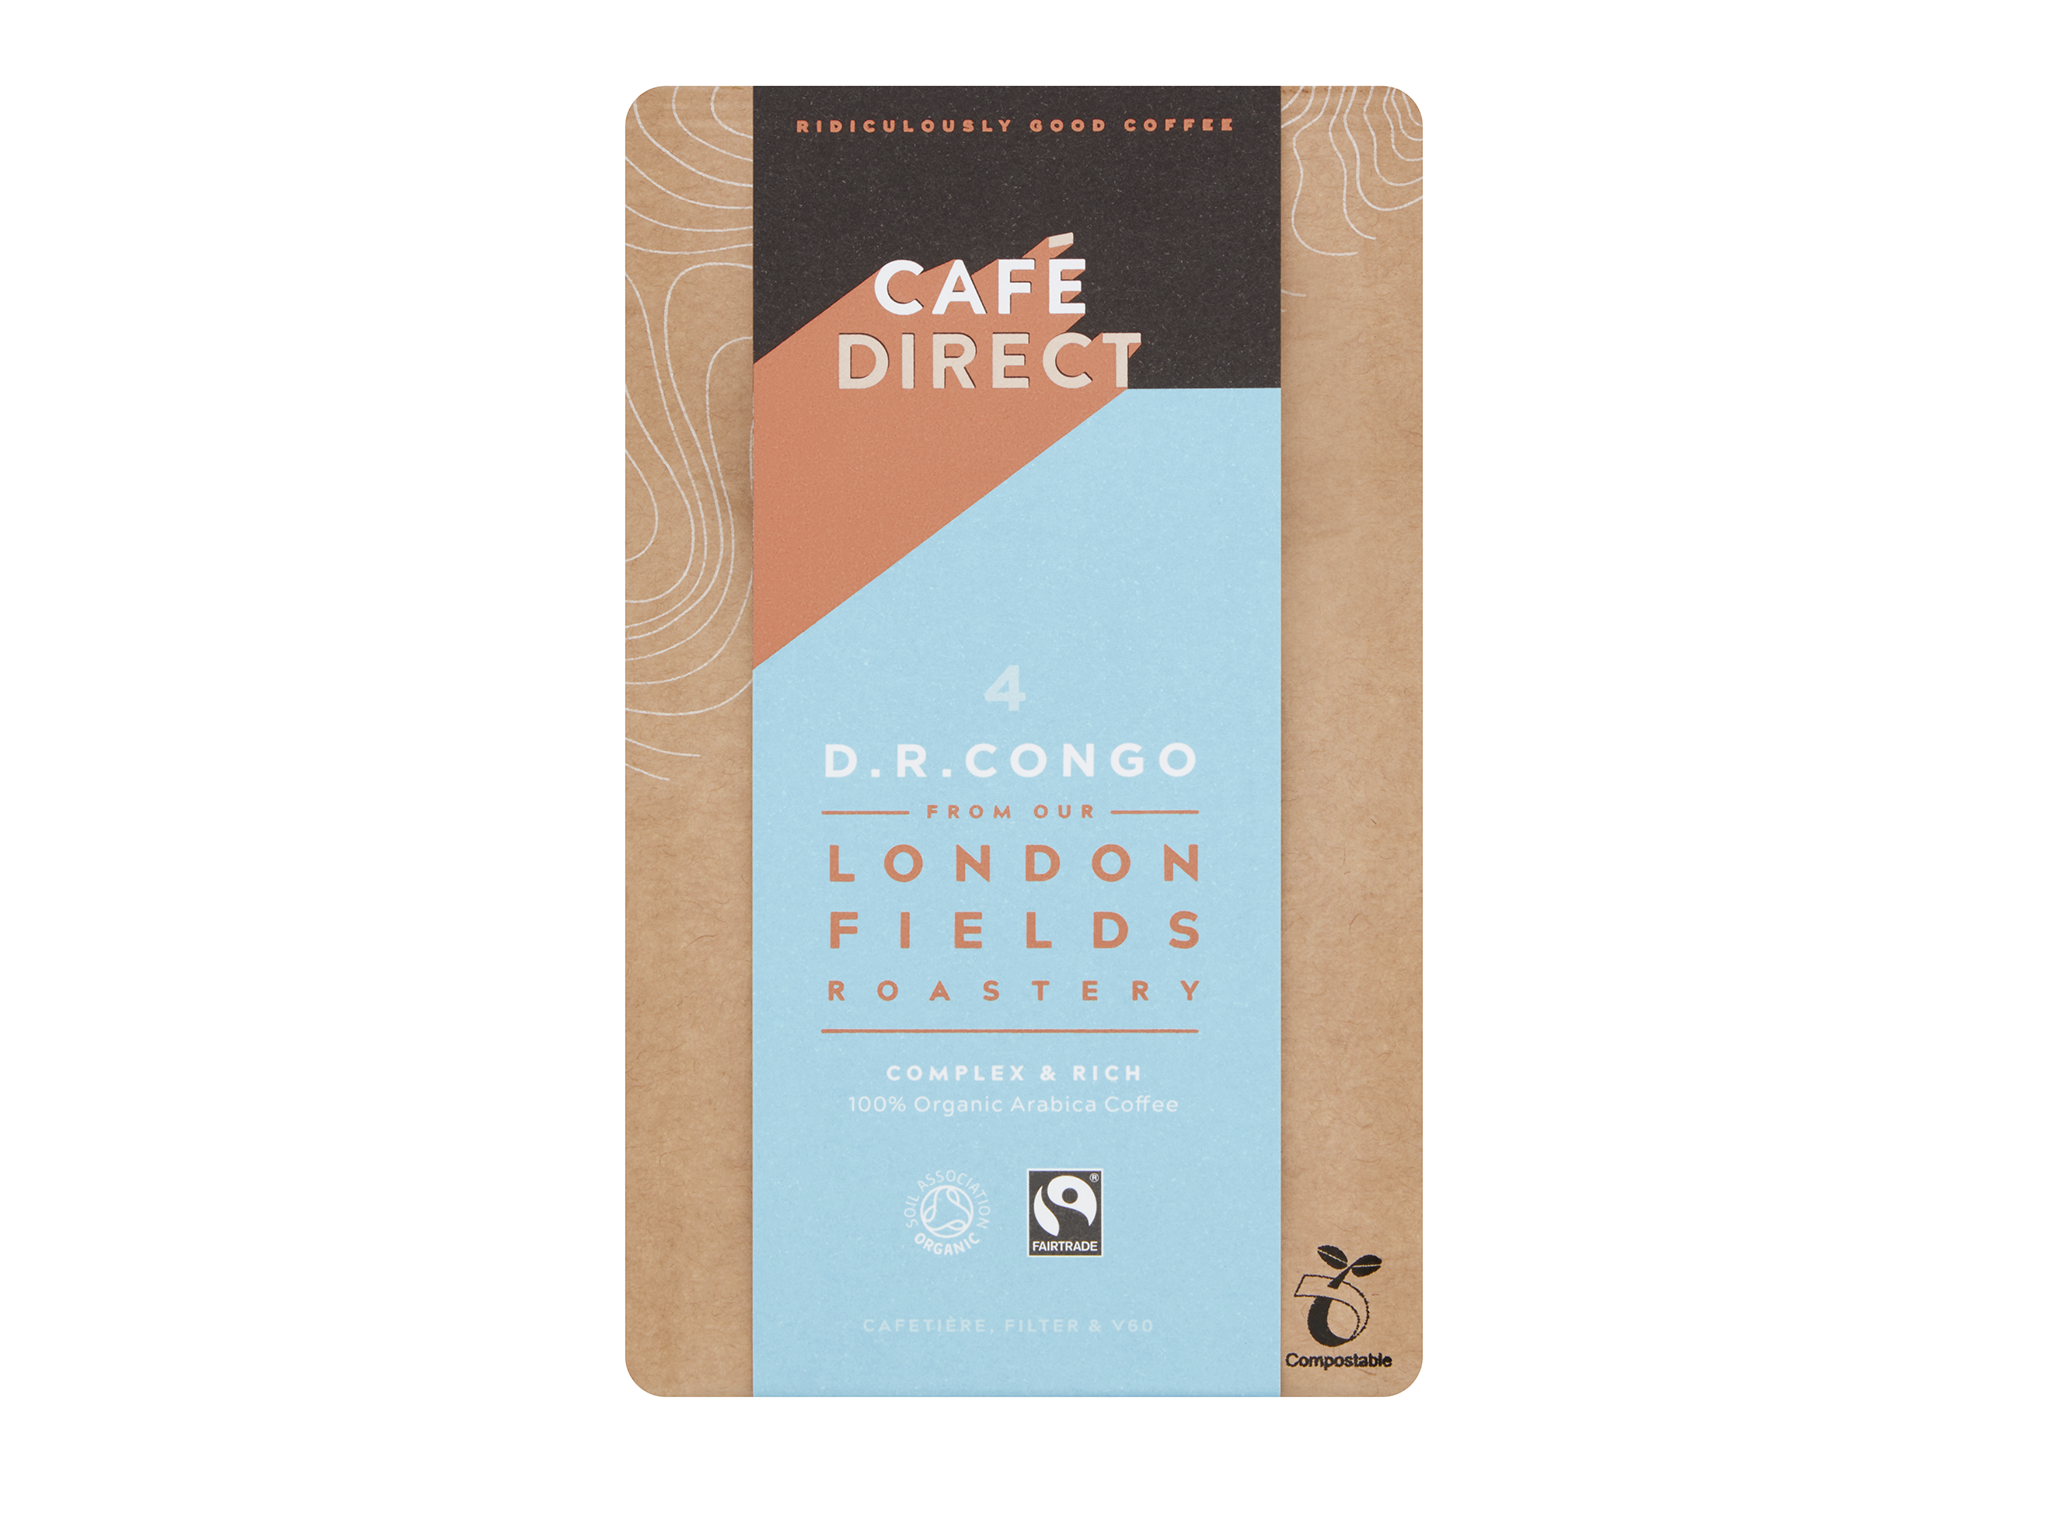 Cafe Direct packet of coffee